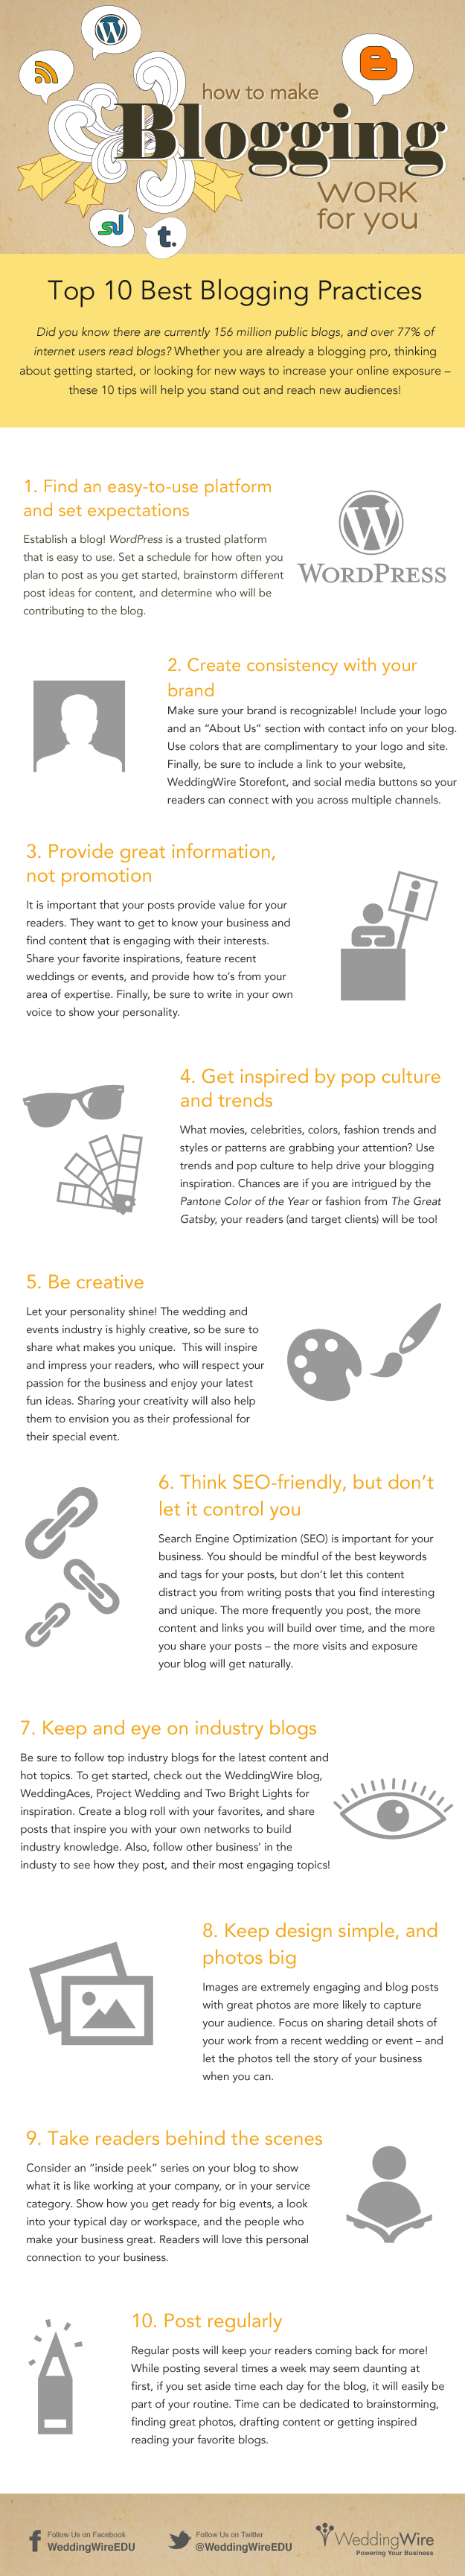 How to make blogging work for you - Ten best blogging practices [INFOGRAPHIC]